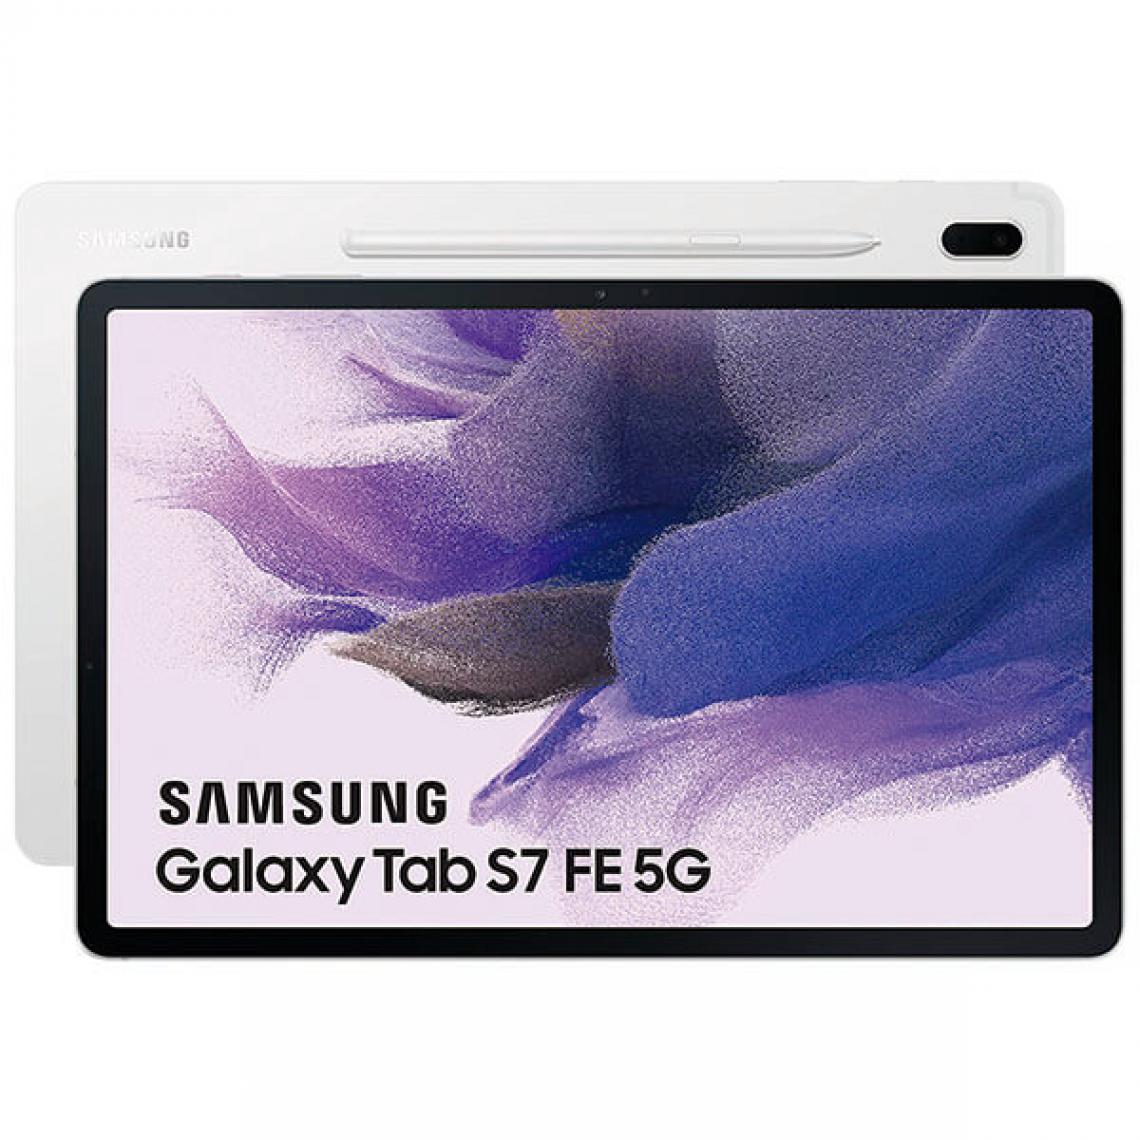 Samsung - Samsung Galaxy Tab S7 FE 5G 12.4" 4Go / 128Go Argent (Mystic Silver) T736 - Tablette Android